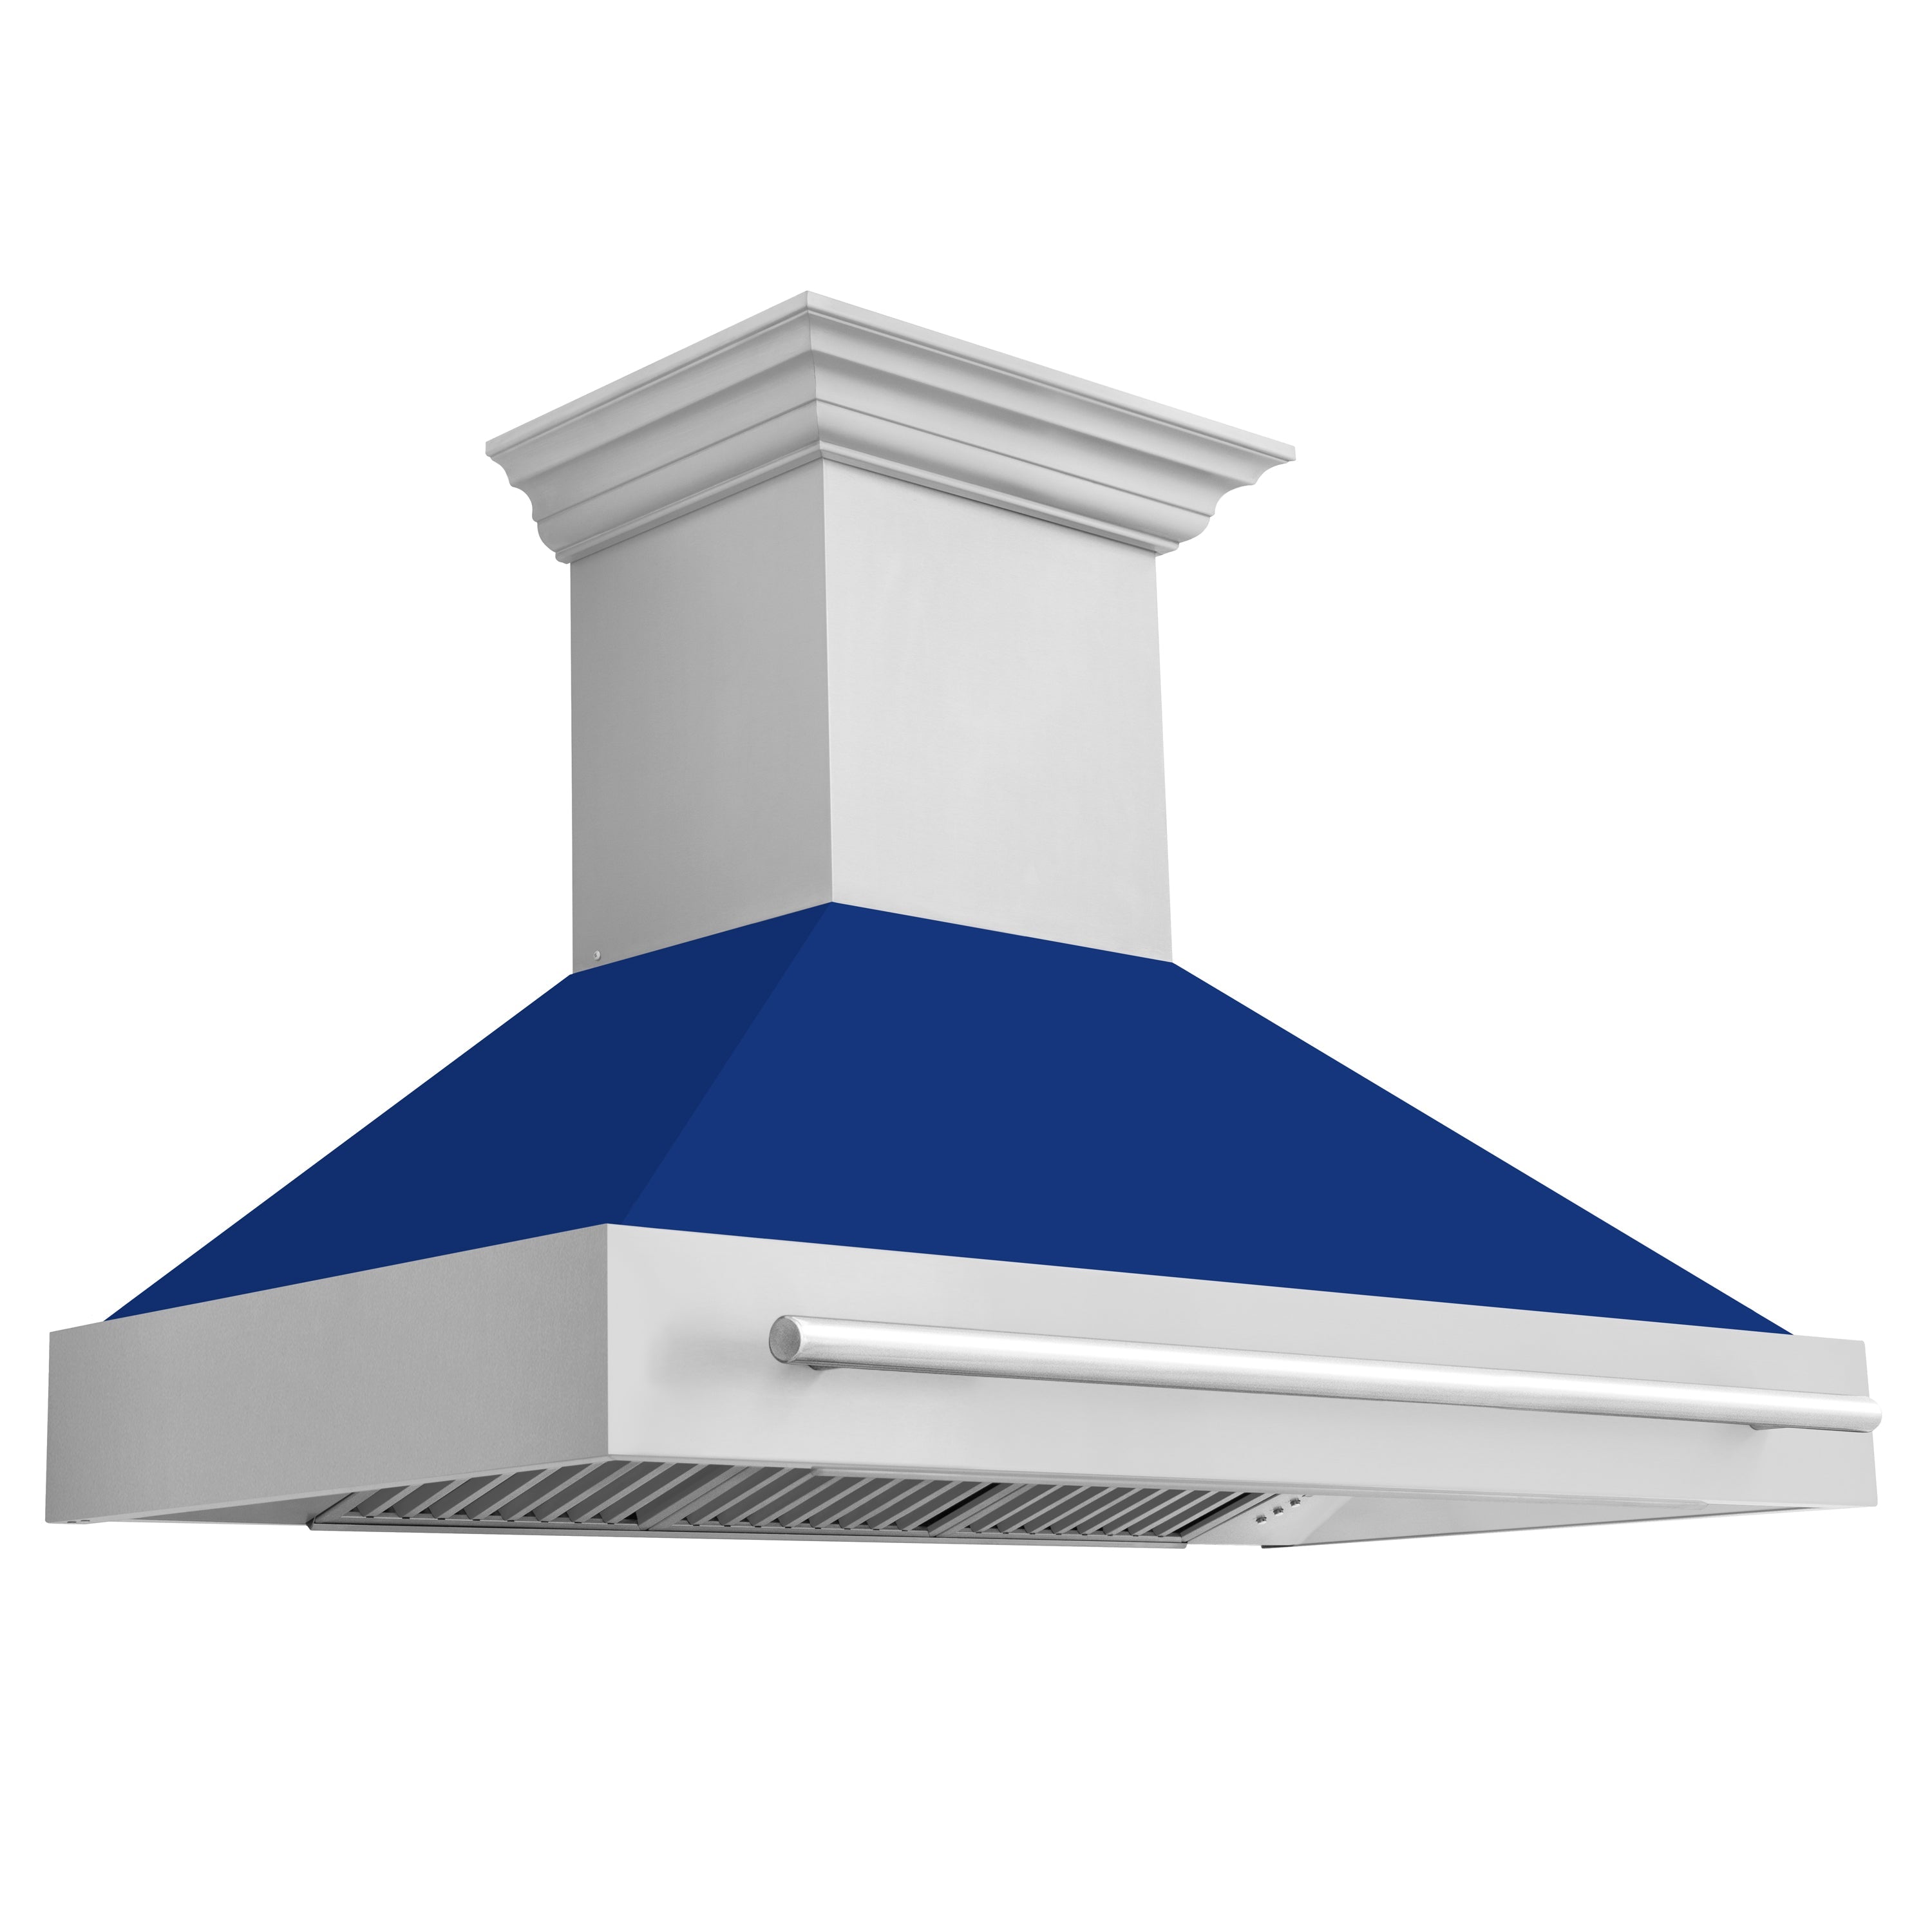 ZLINE 48 in. Stainless Steel Range Hood with Stainless Steel Handle (8654STX-48) Blue Gloss